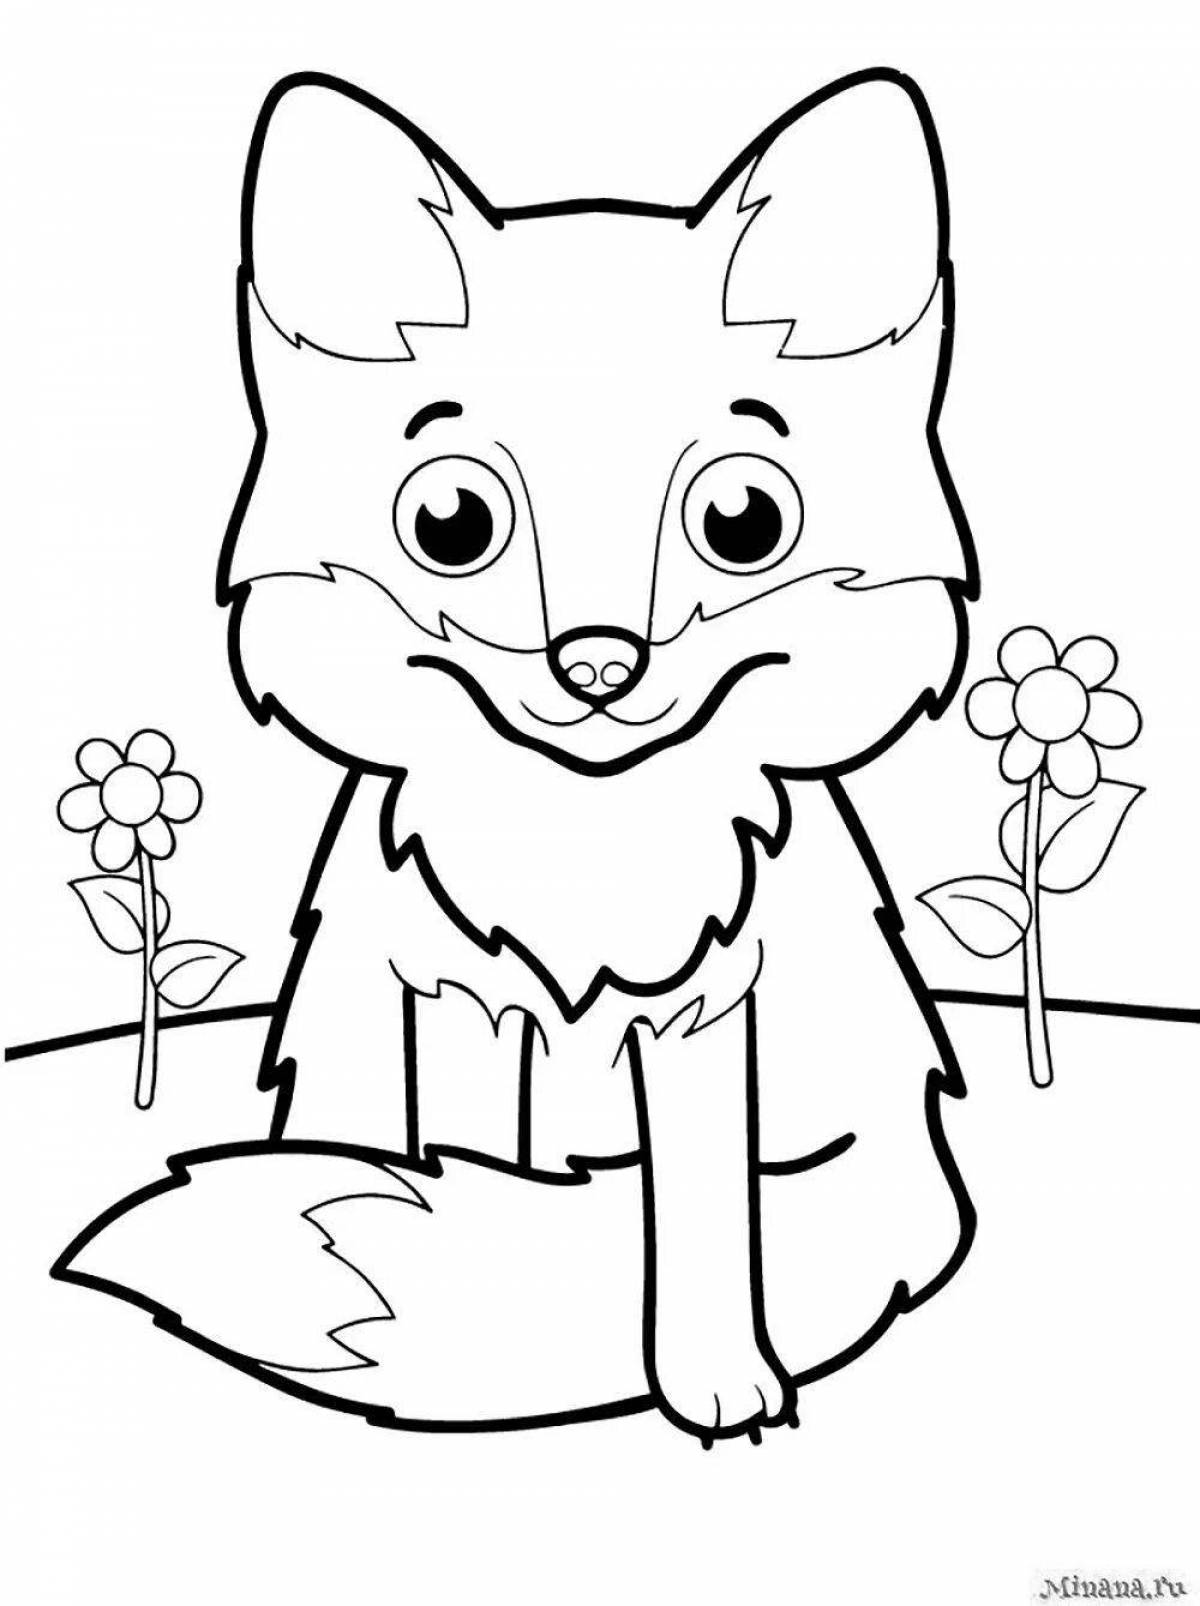 Cute fox coloring book for girls